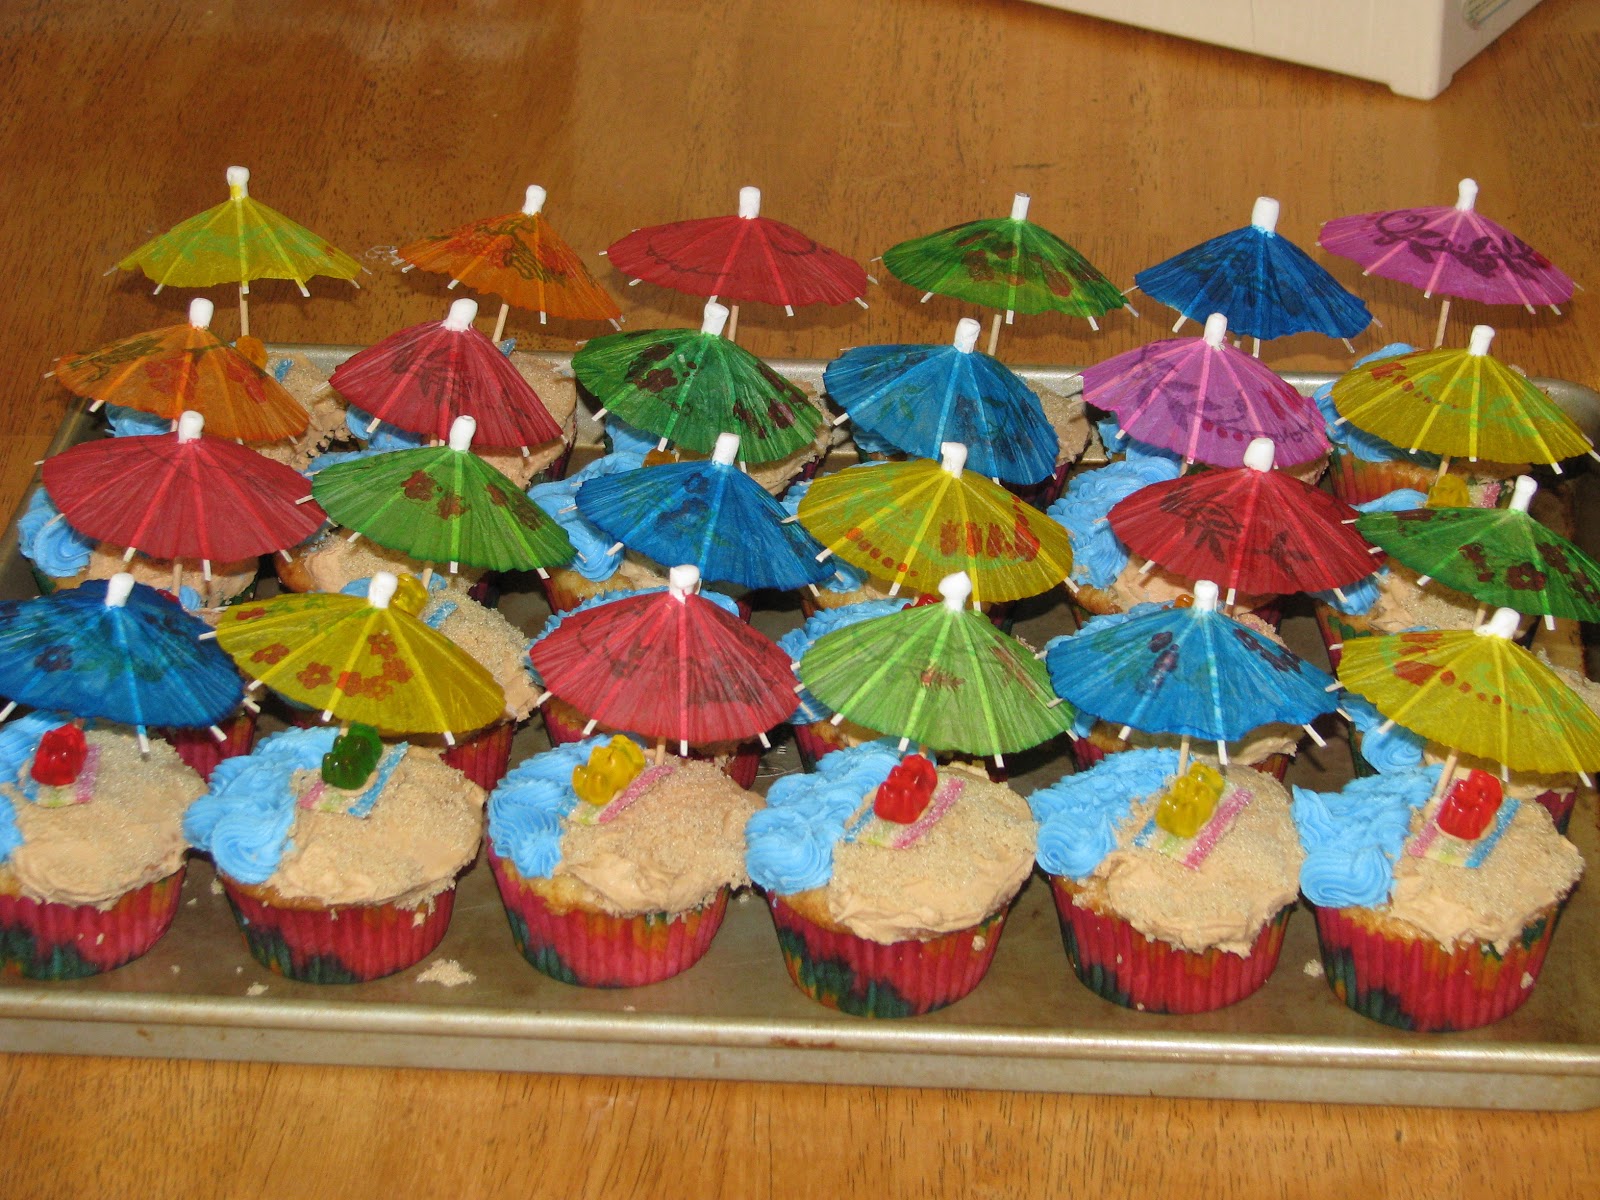 cool cake ideas for girls Beach Themed Cupcakes for the End of the Schoolyear